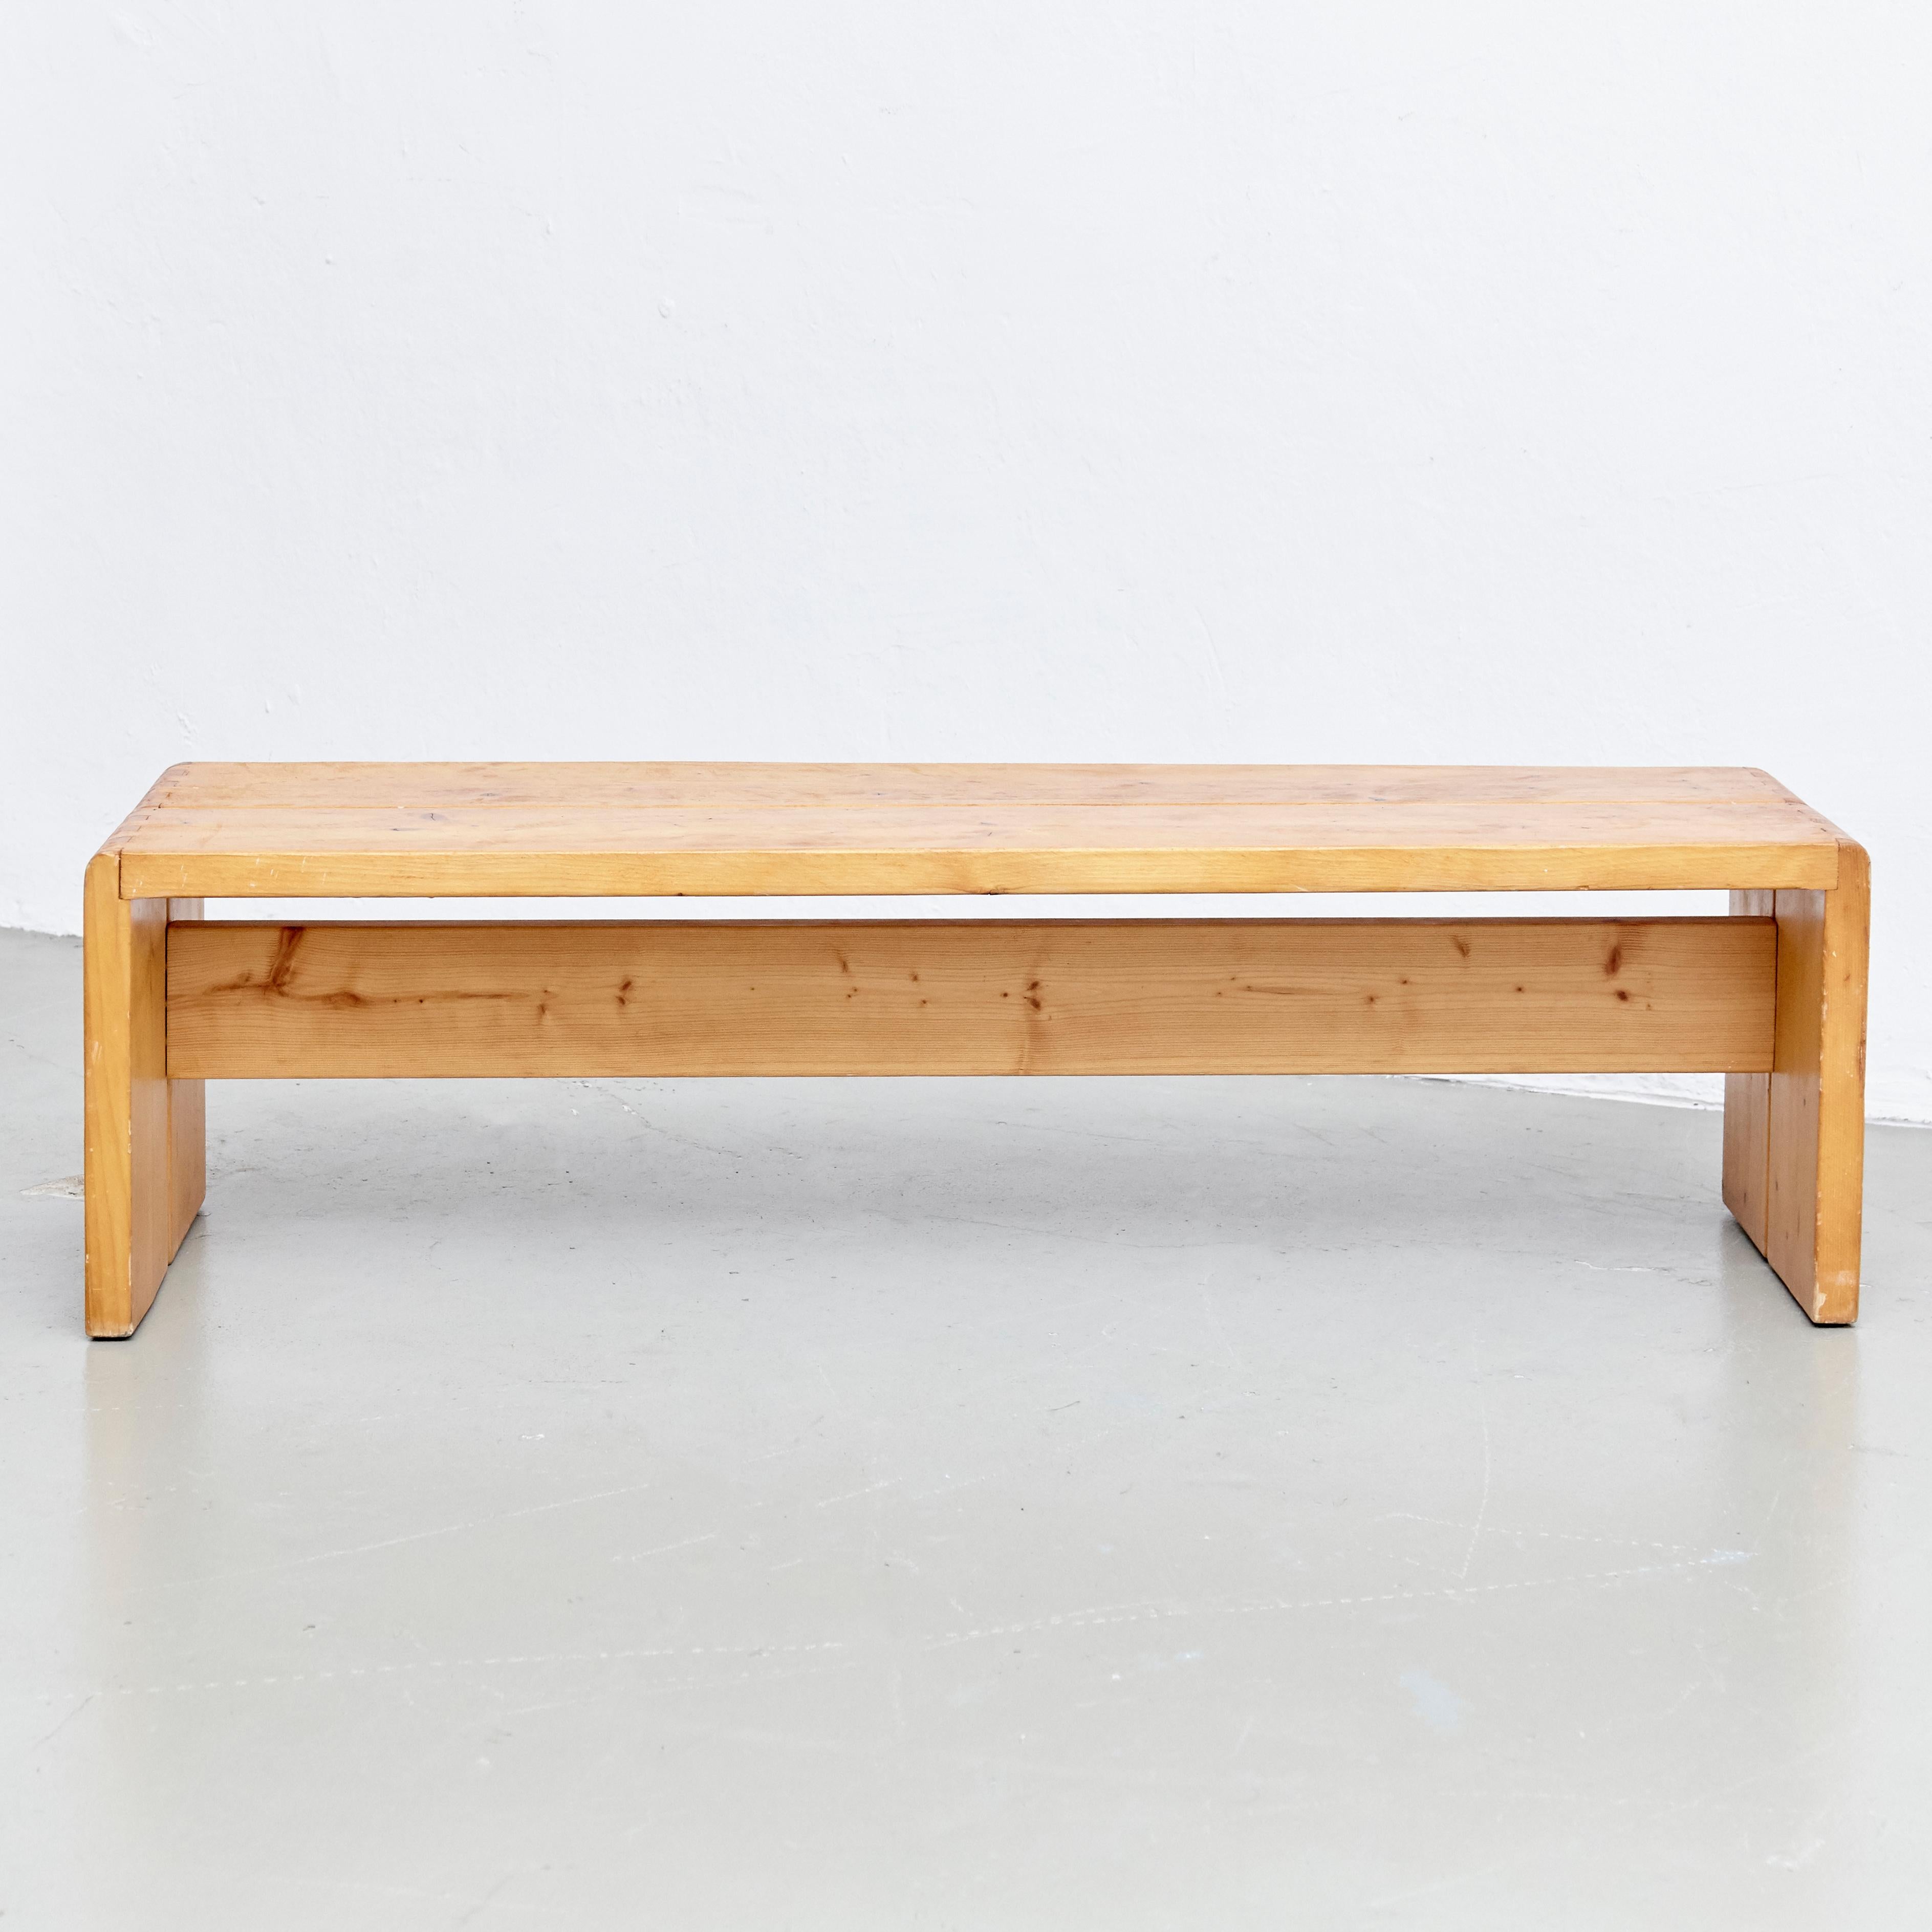 French Charlotte Perriand Large Wood Bench for Les Arcs, circa 1960